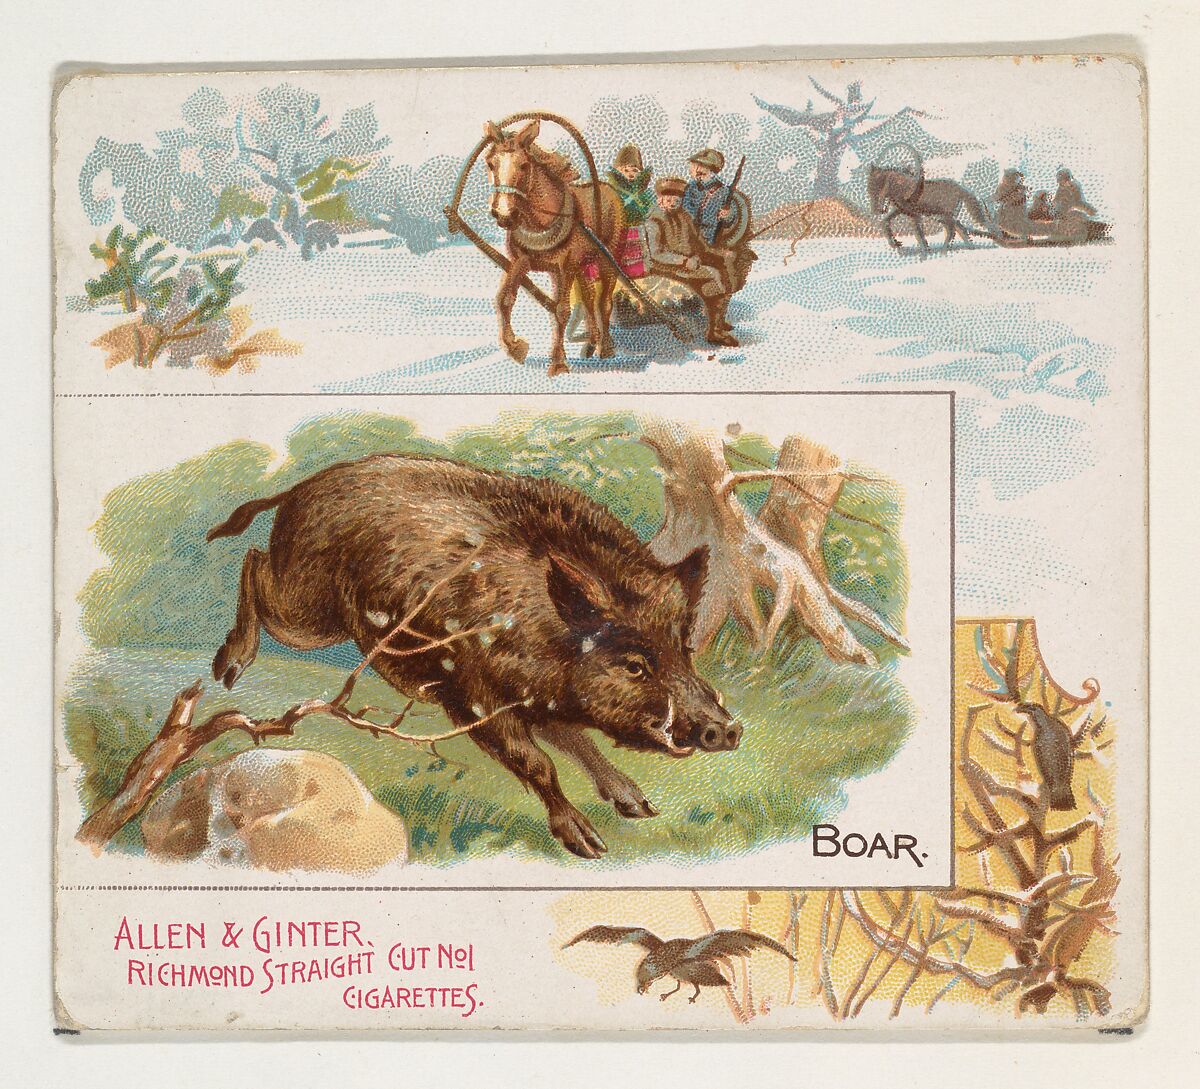 Boar, from Quadrupeds series (N41) for Allen & Ginter Cigarettes, Issued by Allen &amp; Ginter (American, Richmond, Virginia), Commercial color lithograph 